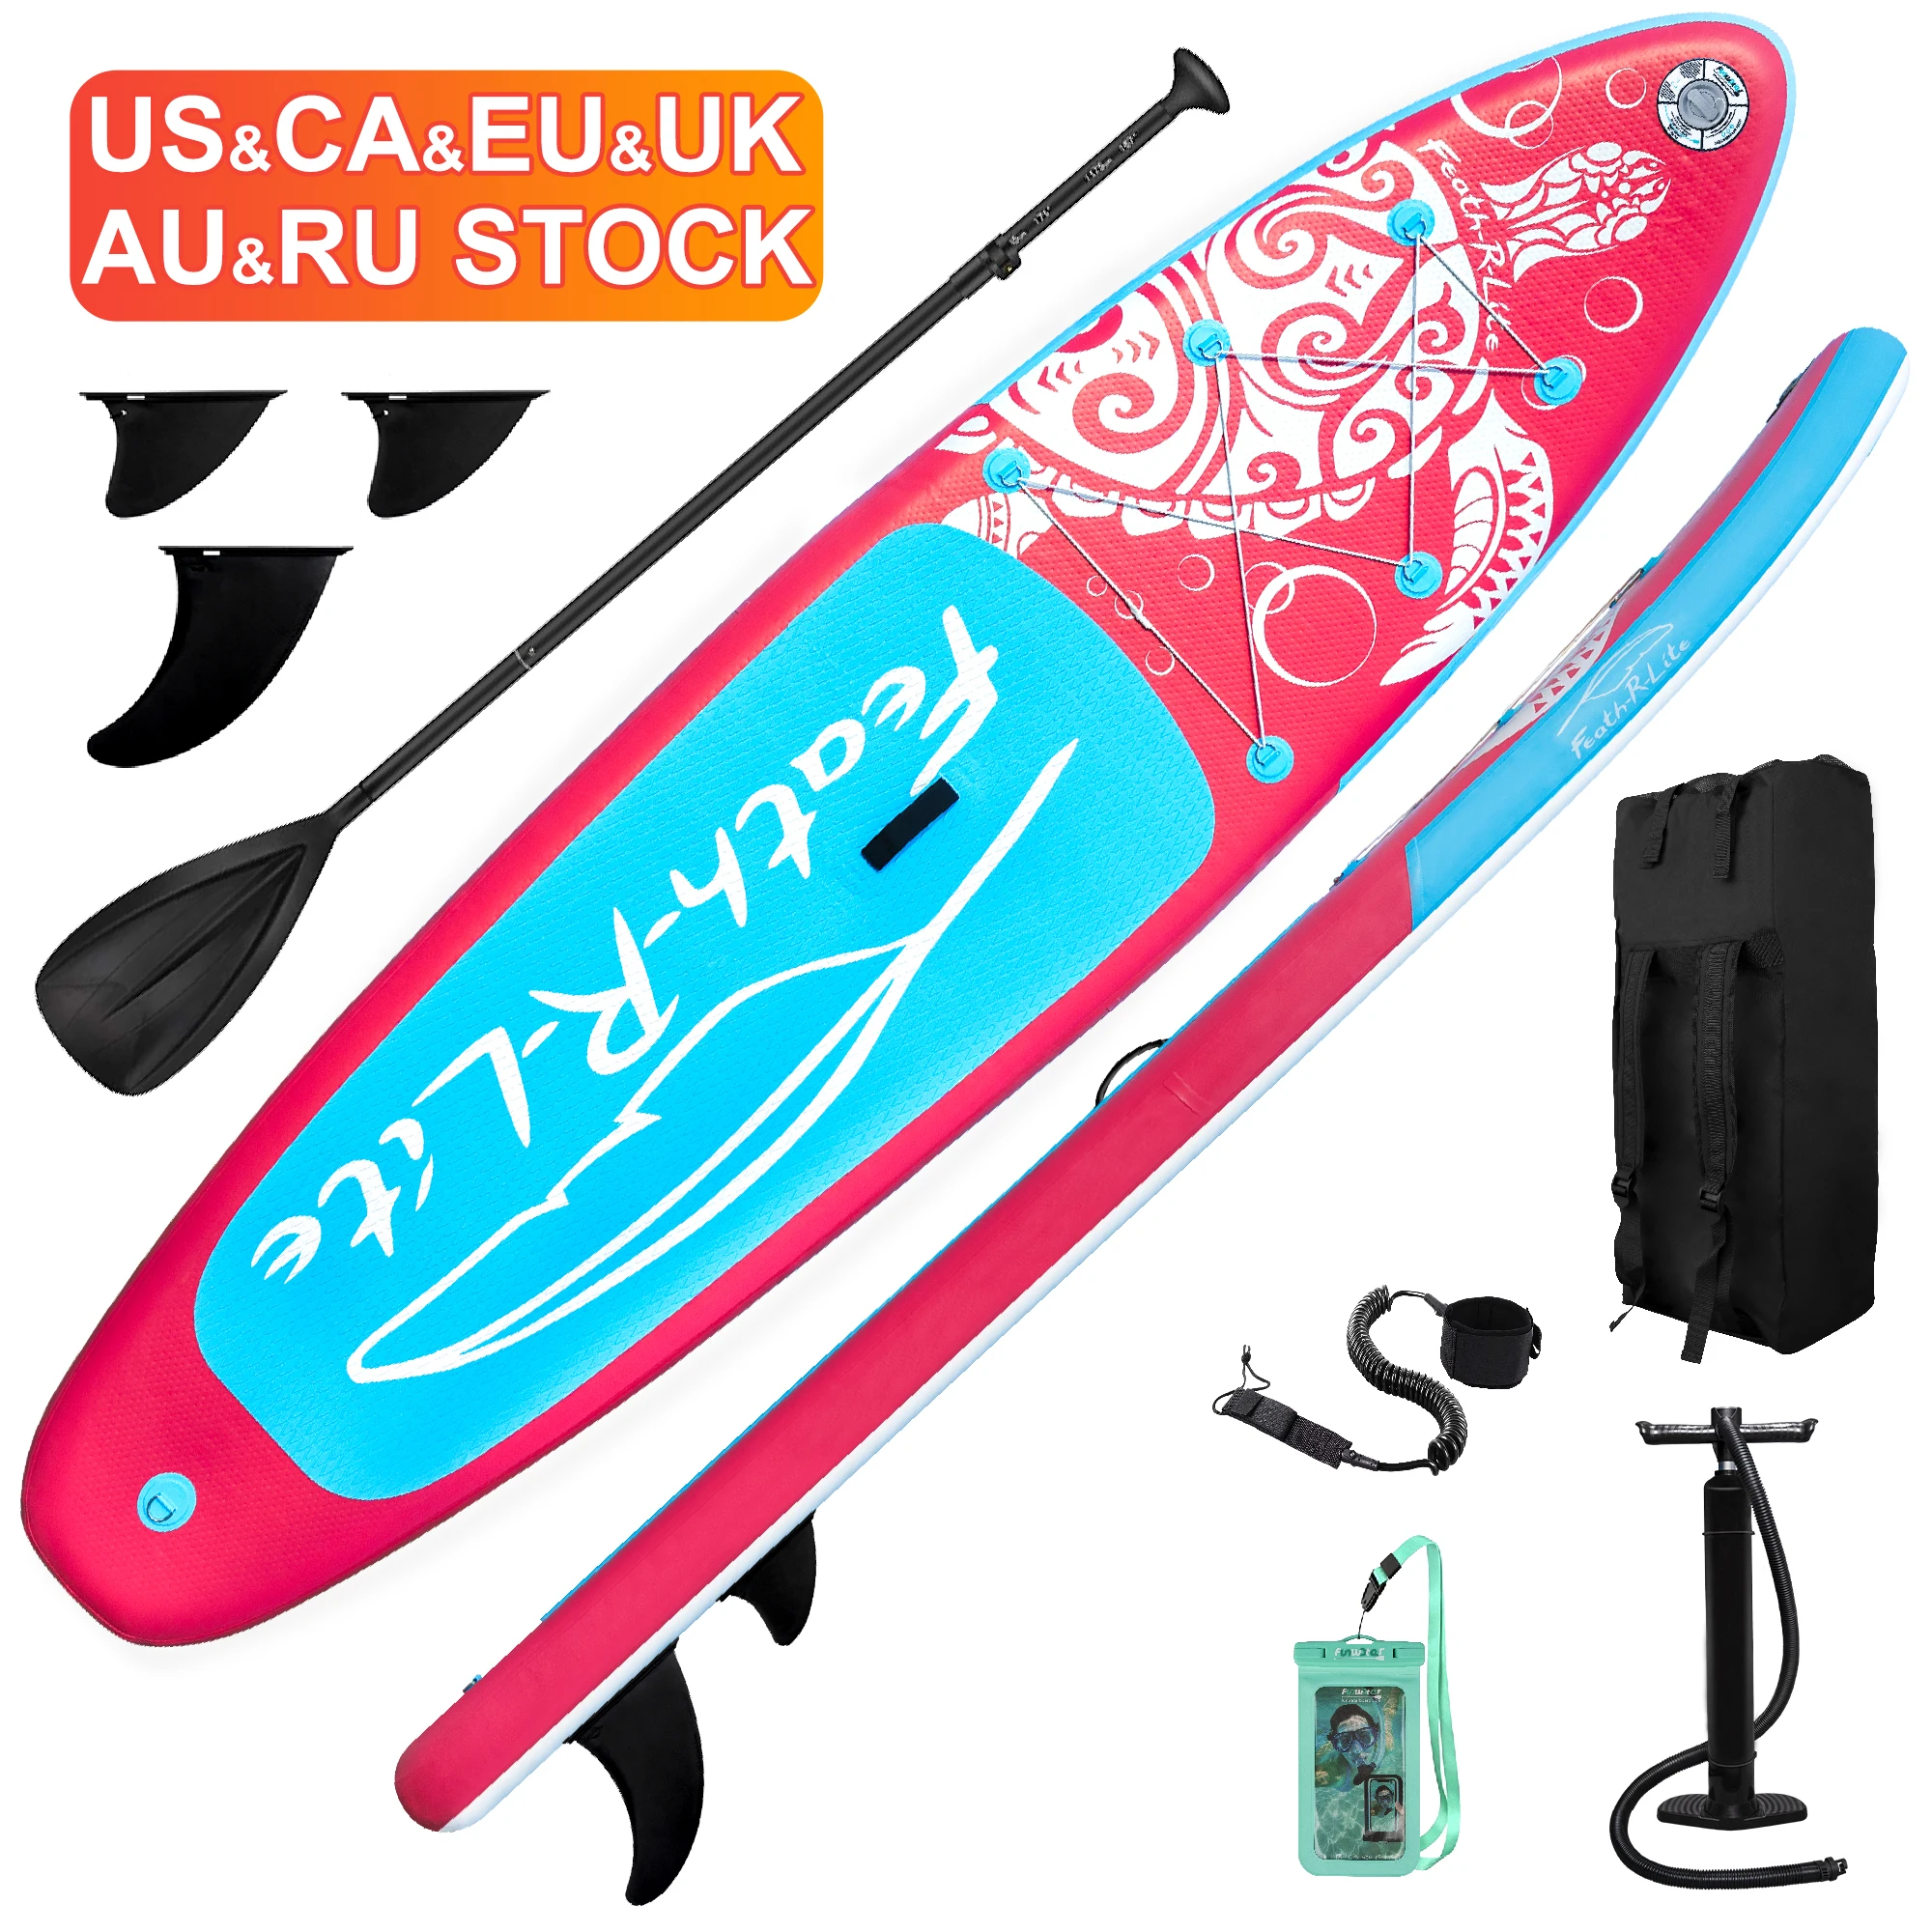 

FUNWATER Dropshipping OEM paddle board inflatable stand tabla de surfing surf board surfboard sup board paddleboard water sports